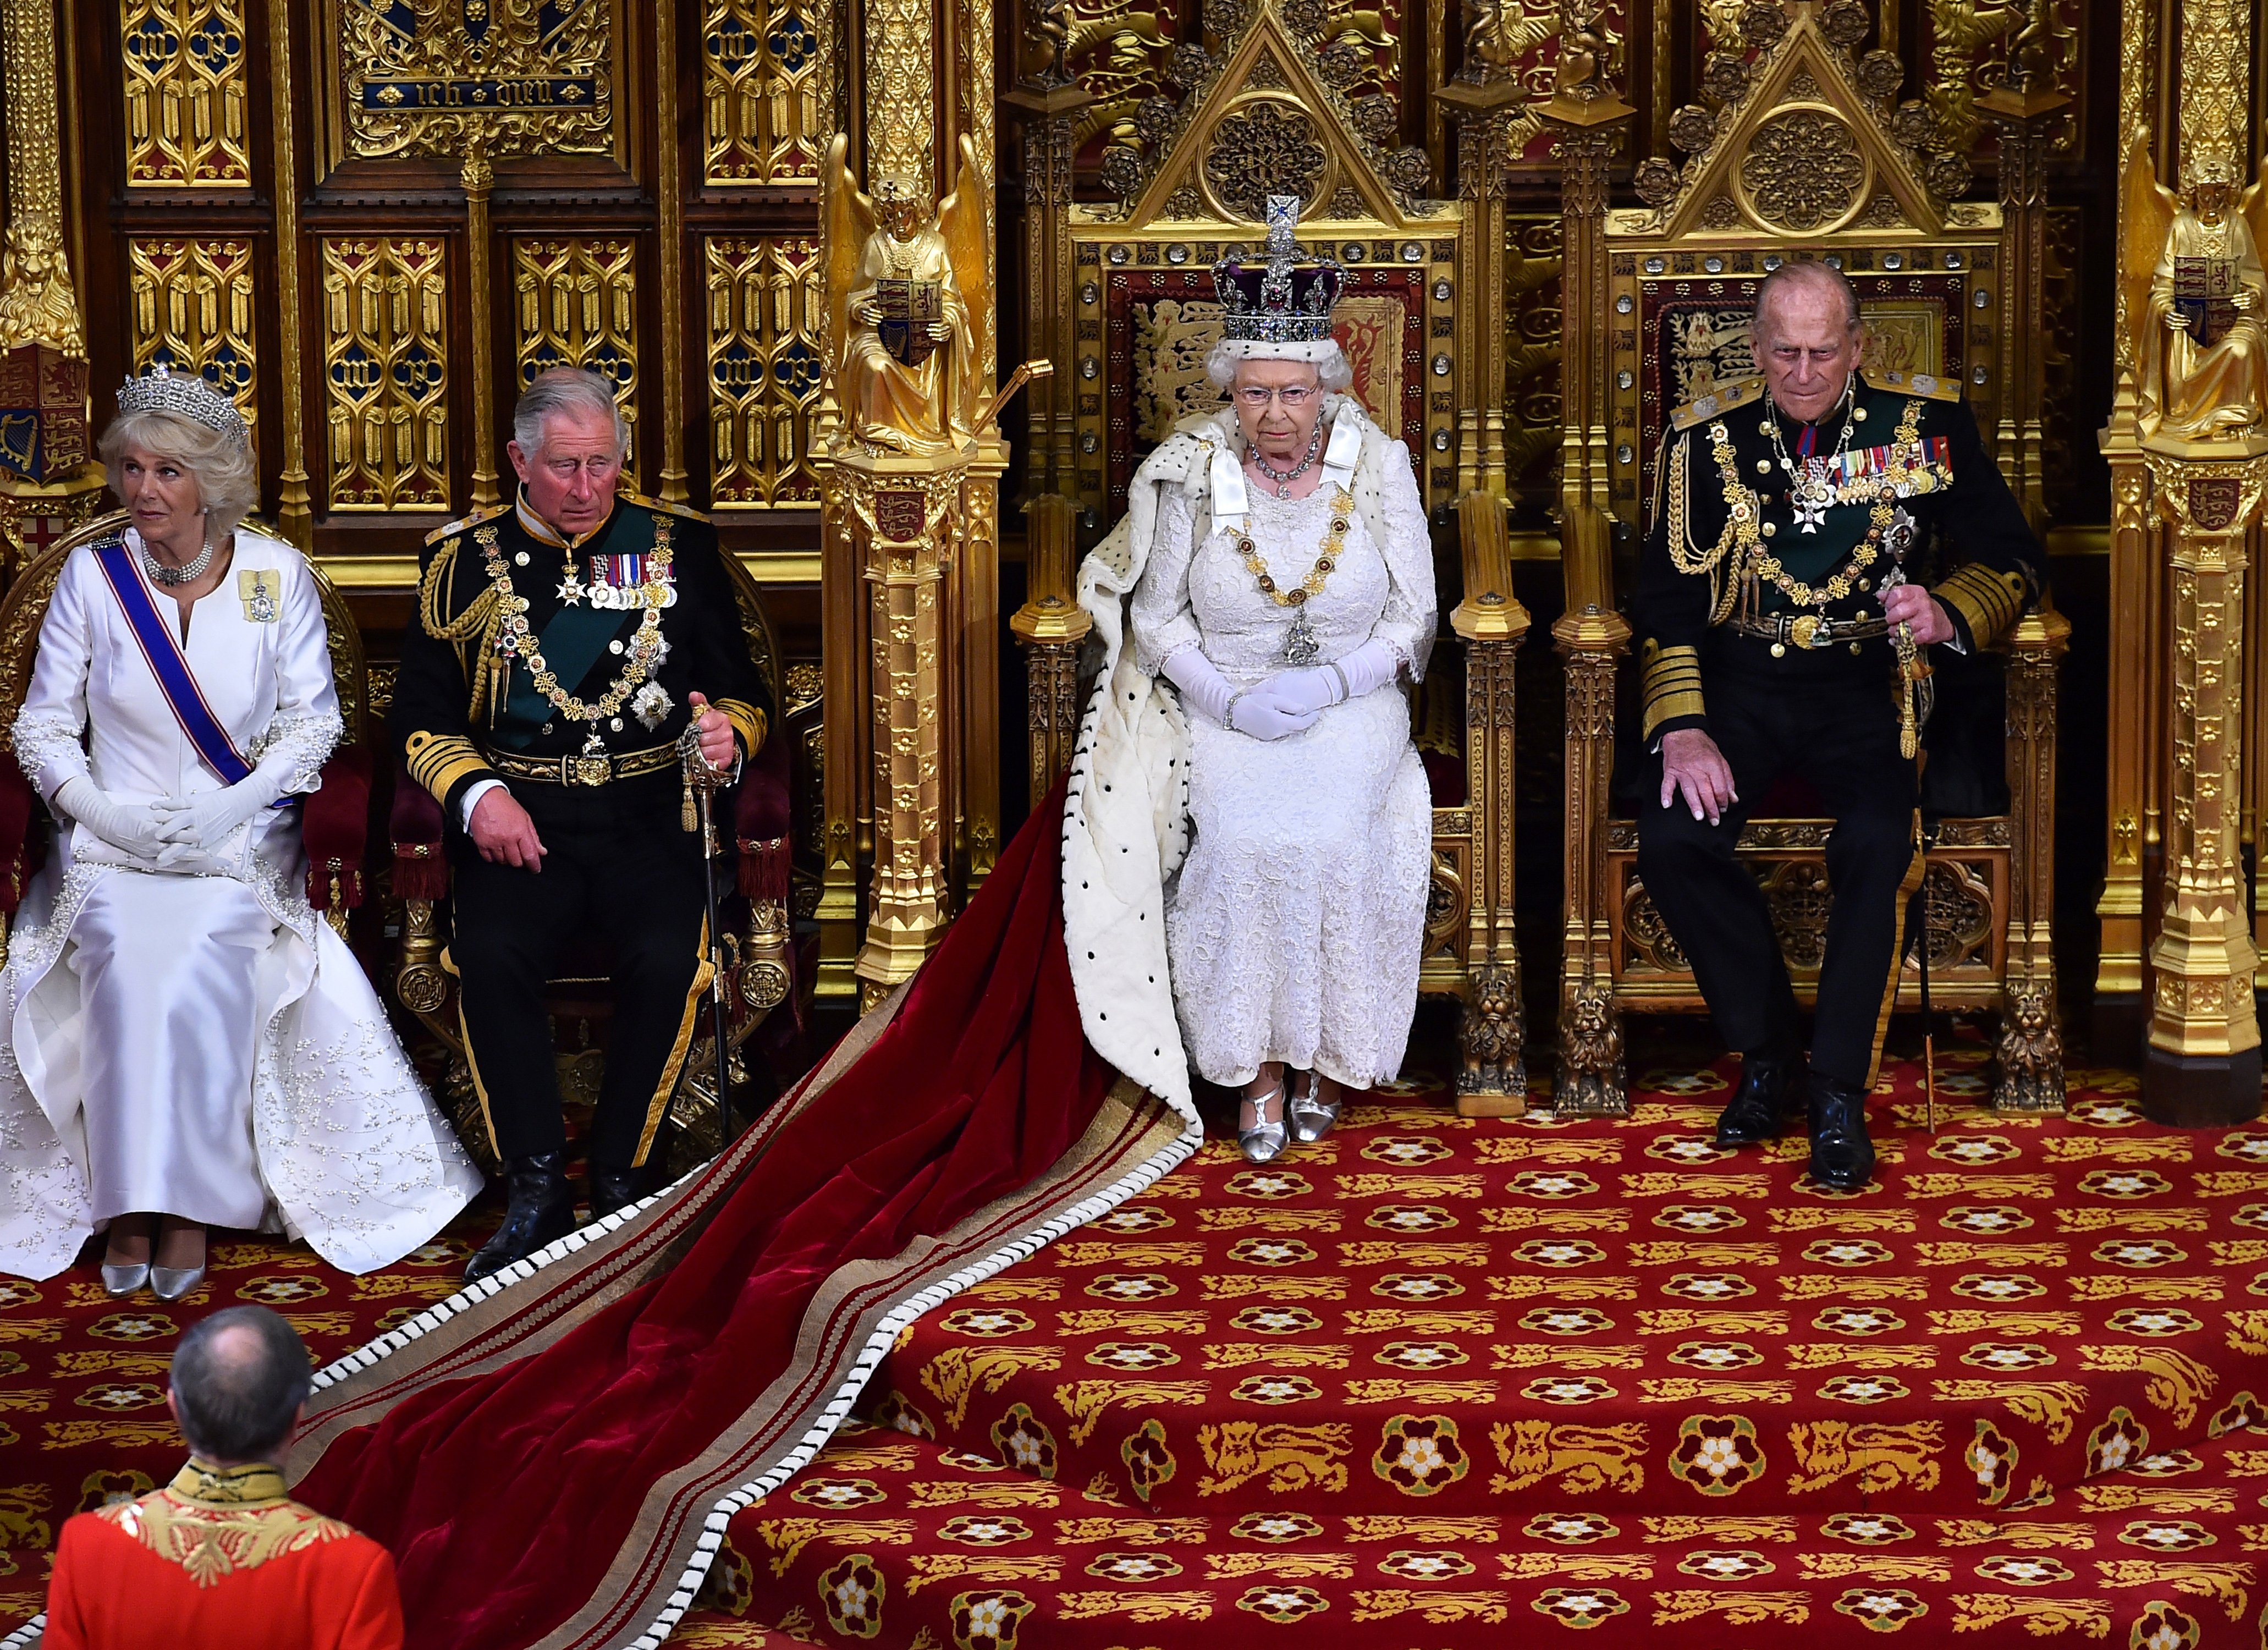 Queen Elizabeth II pictured in the House of Lords alongside Prince Philip, Prince Charles and Camilla Parker-Bowles during the State Opening of Parliament in the House of Lords, at the Palace of Westminster on May 27, 2015 in London, England. | Source: Getty Images